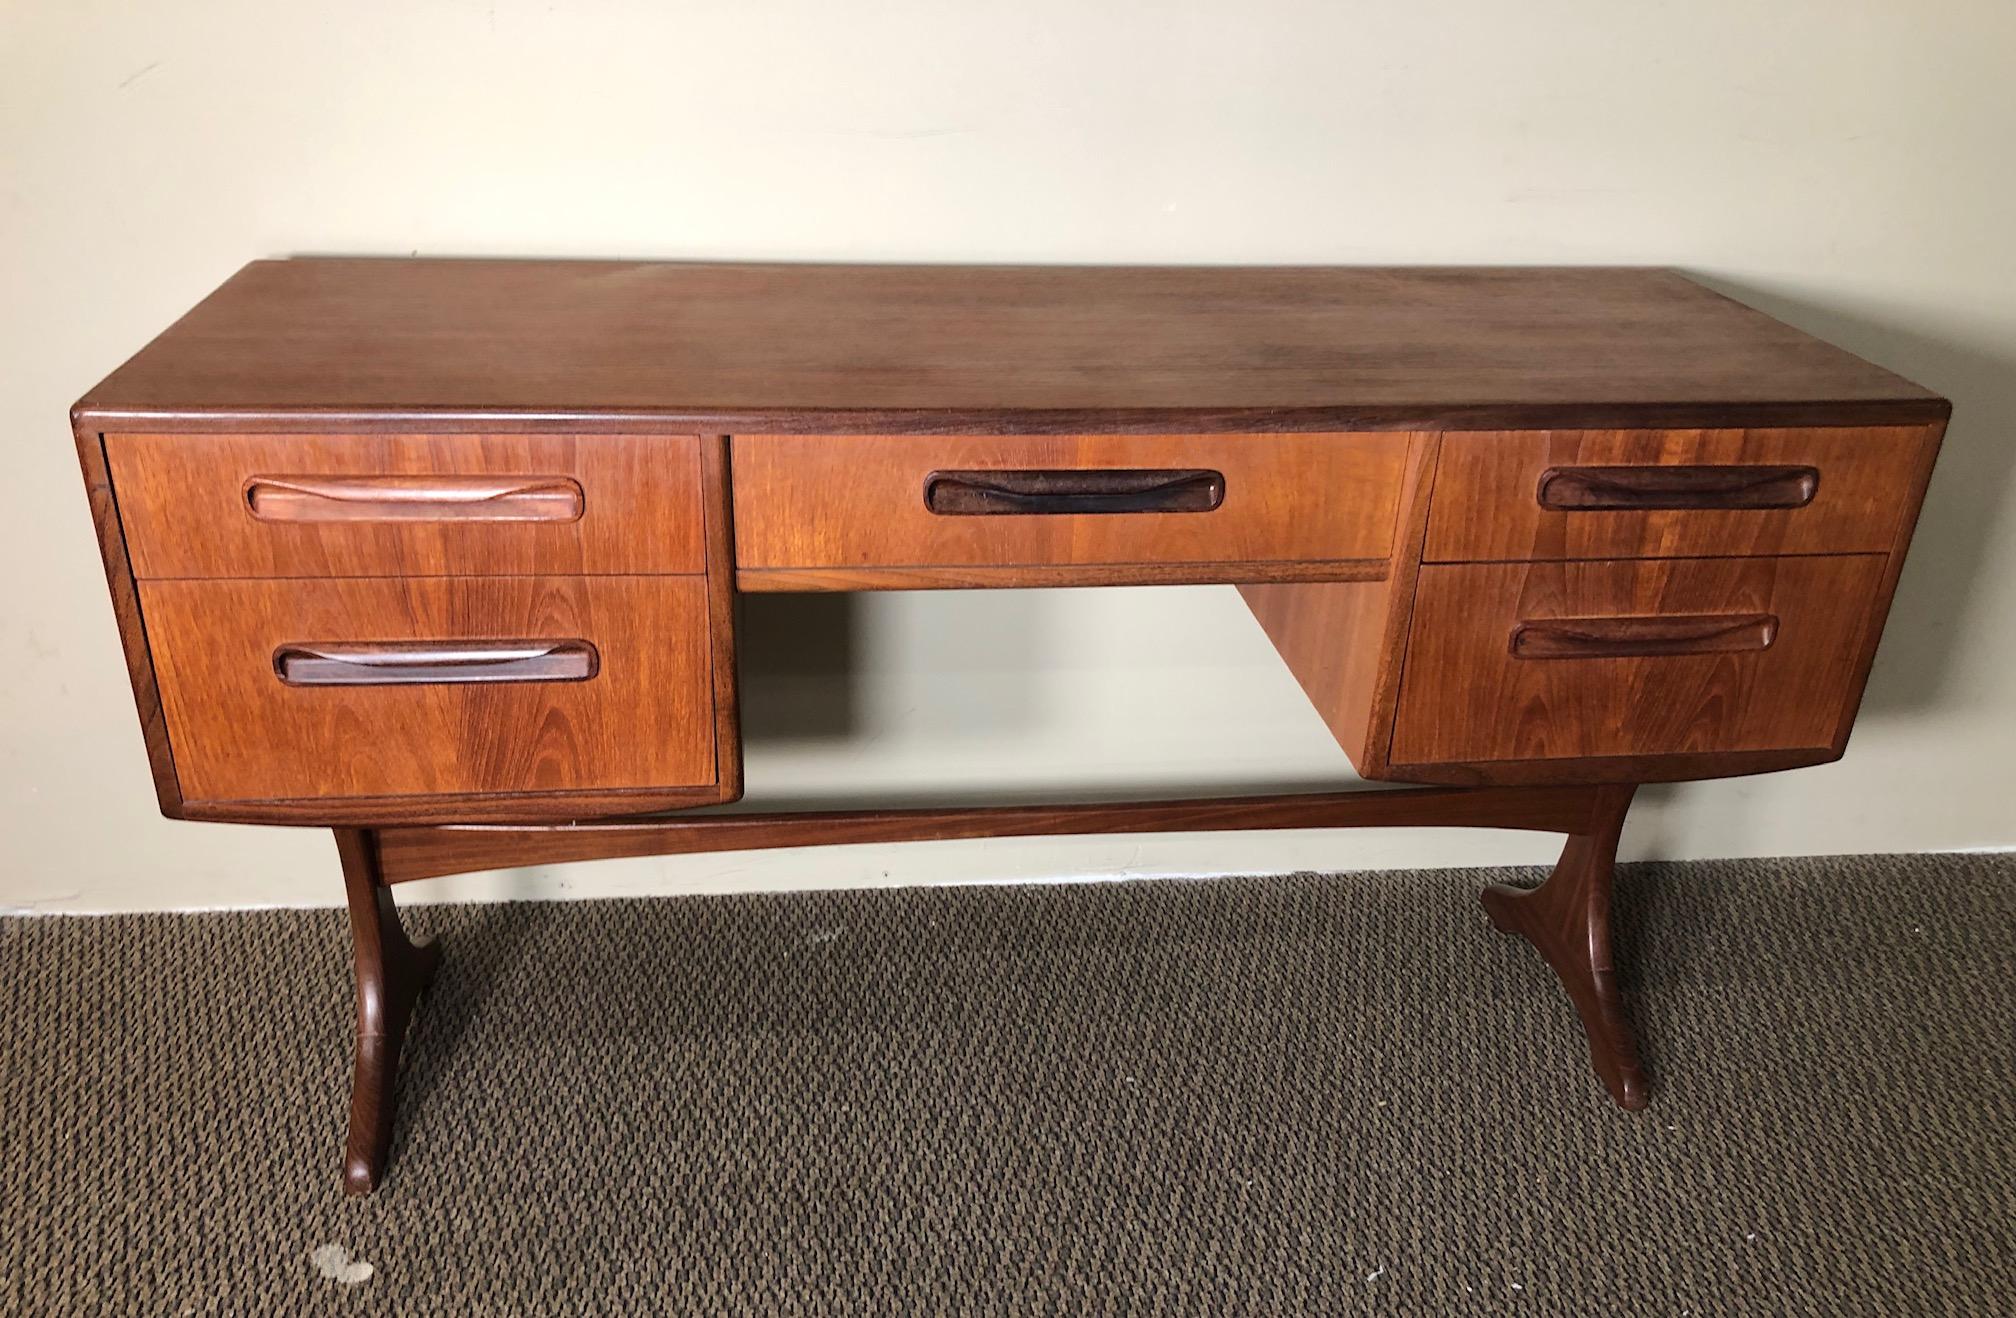 Fantastic midcentury teak vanity or desk. Designed in the 1960s by Victor Bramwell Wilkins for G Plan's Fresco Range.
Very good vintage condition. All the drawers glide well. Original G Plan sticker in the top drawer. The back is